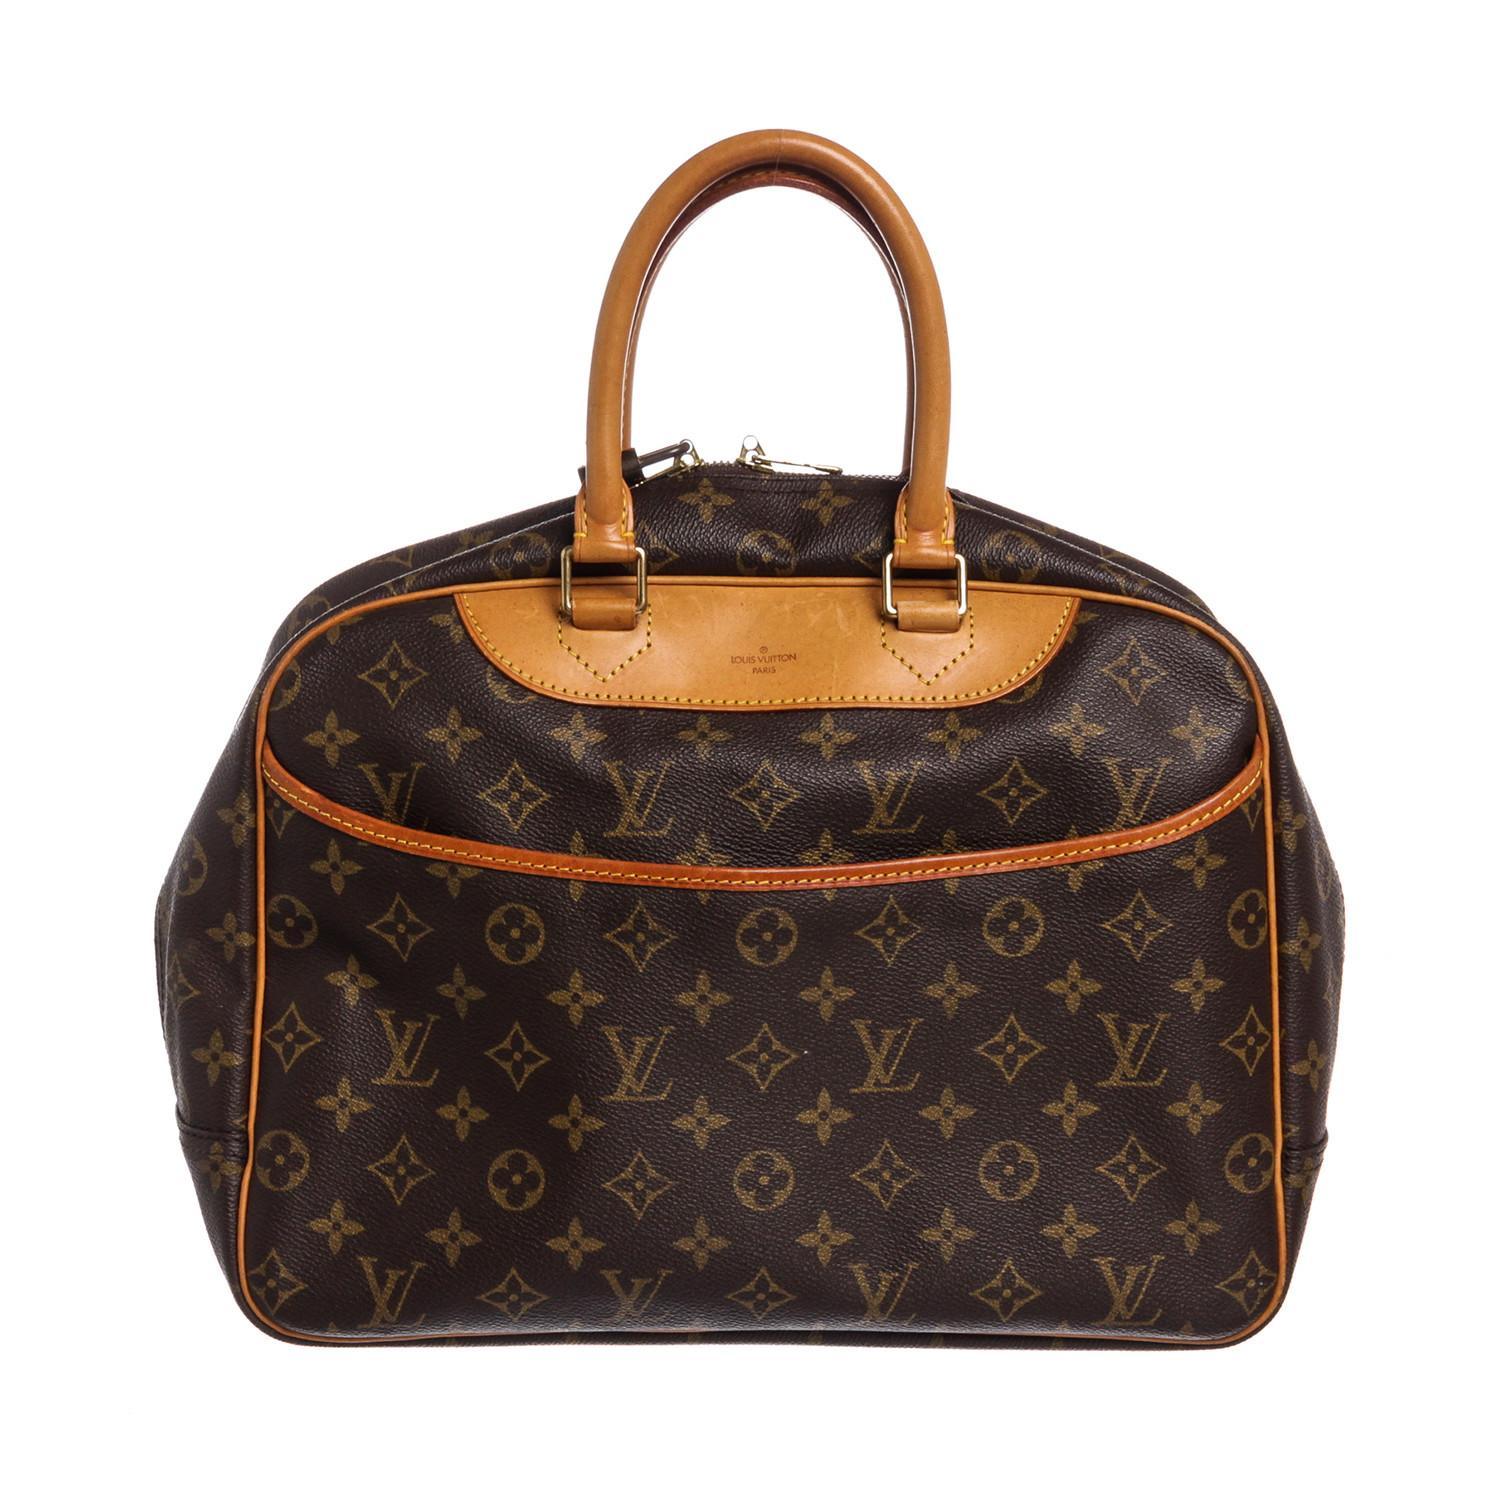 Monogram Canvas Leather Deauville Doctor Bag // Pre-Owned // VI1924 - Pre-Owned Louis Vuitton ...